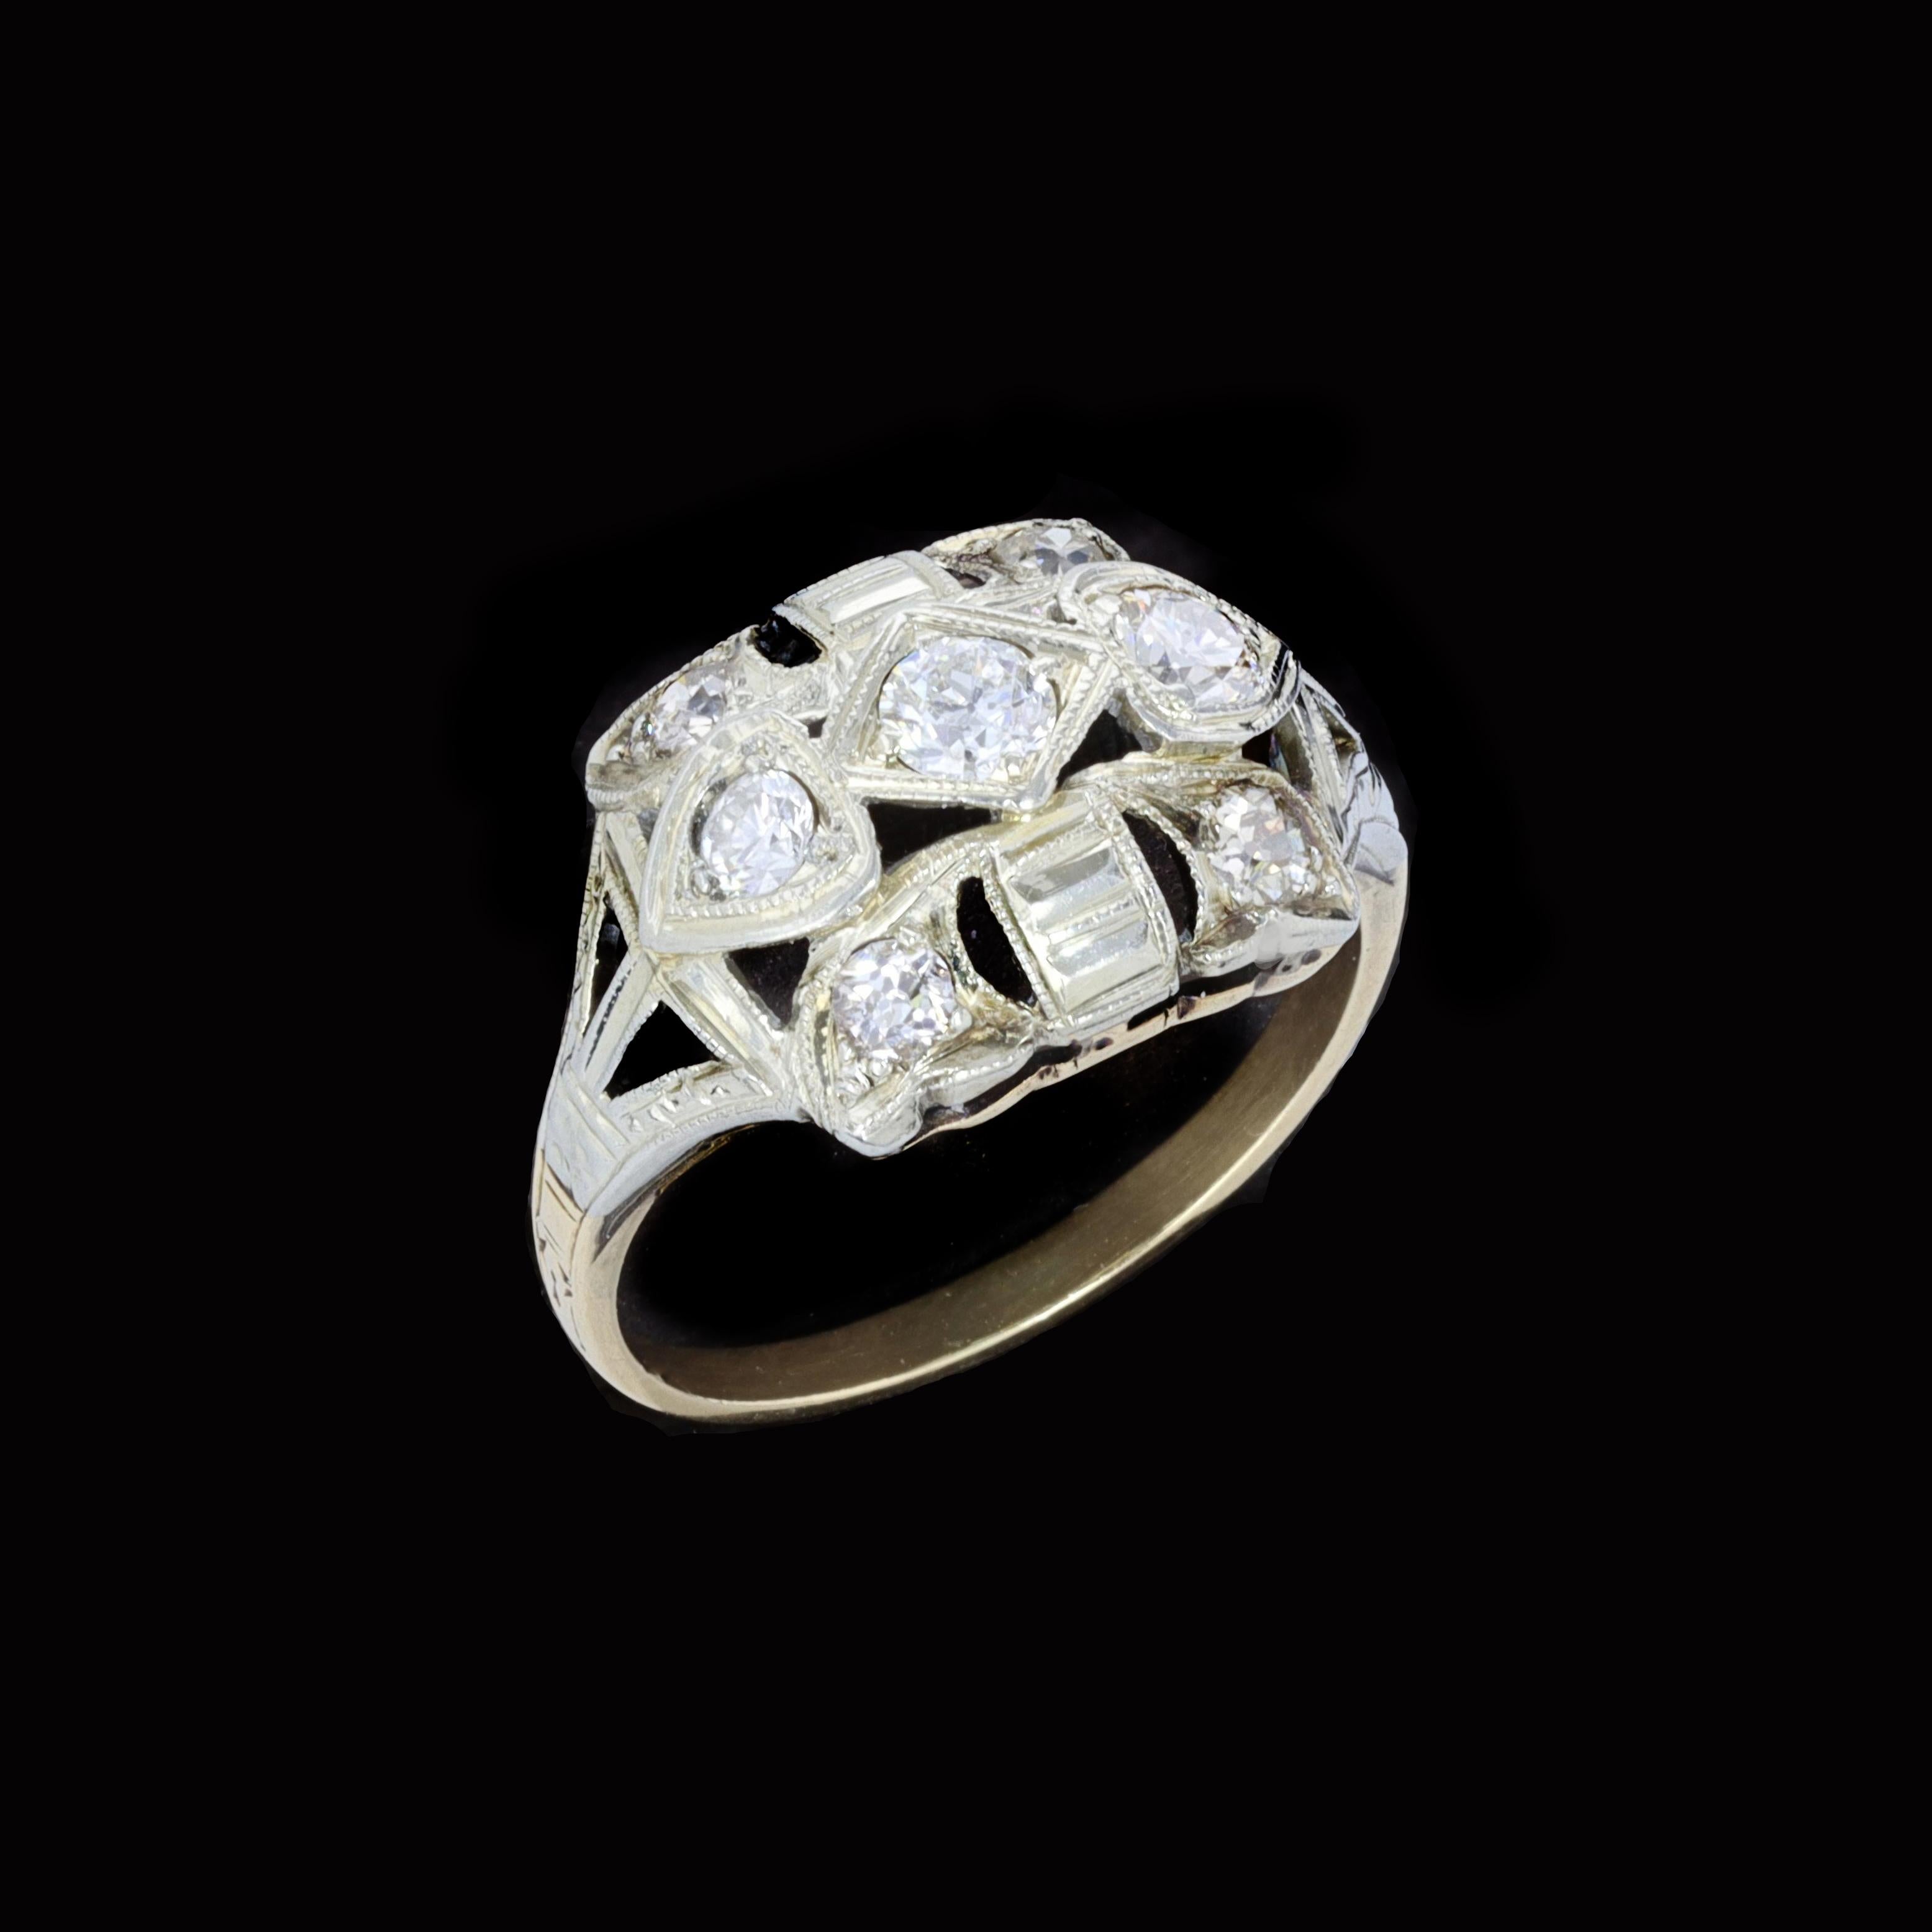 Turn heads with this turn of the 20th century Edwardian diamond 14K yellow gold ring set with seven old mine cut diamonds.The diamonds weigh approximately 0.40ctand the entire ring weighs 2.3 grams. Size 4 3/4

